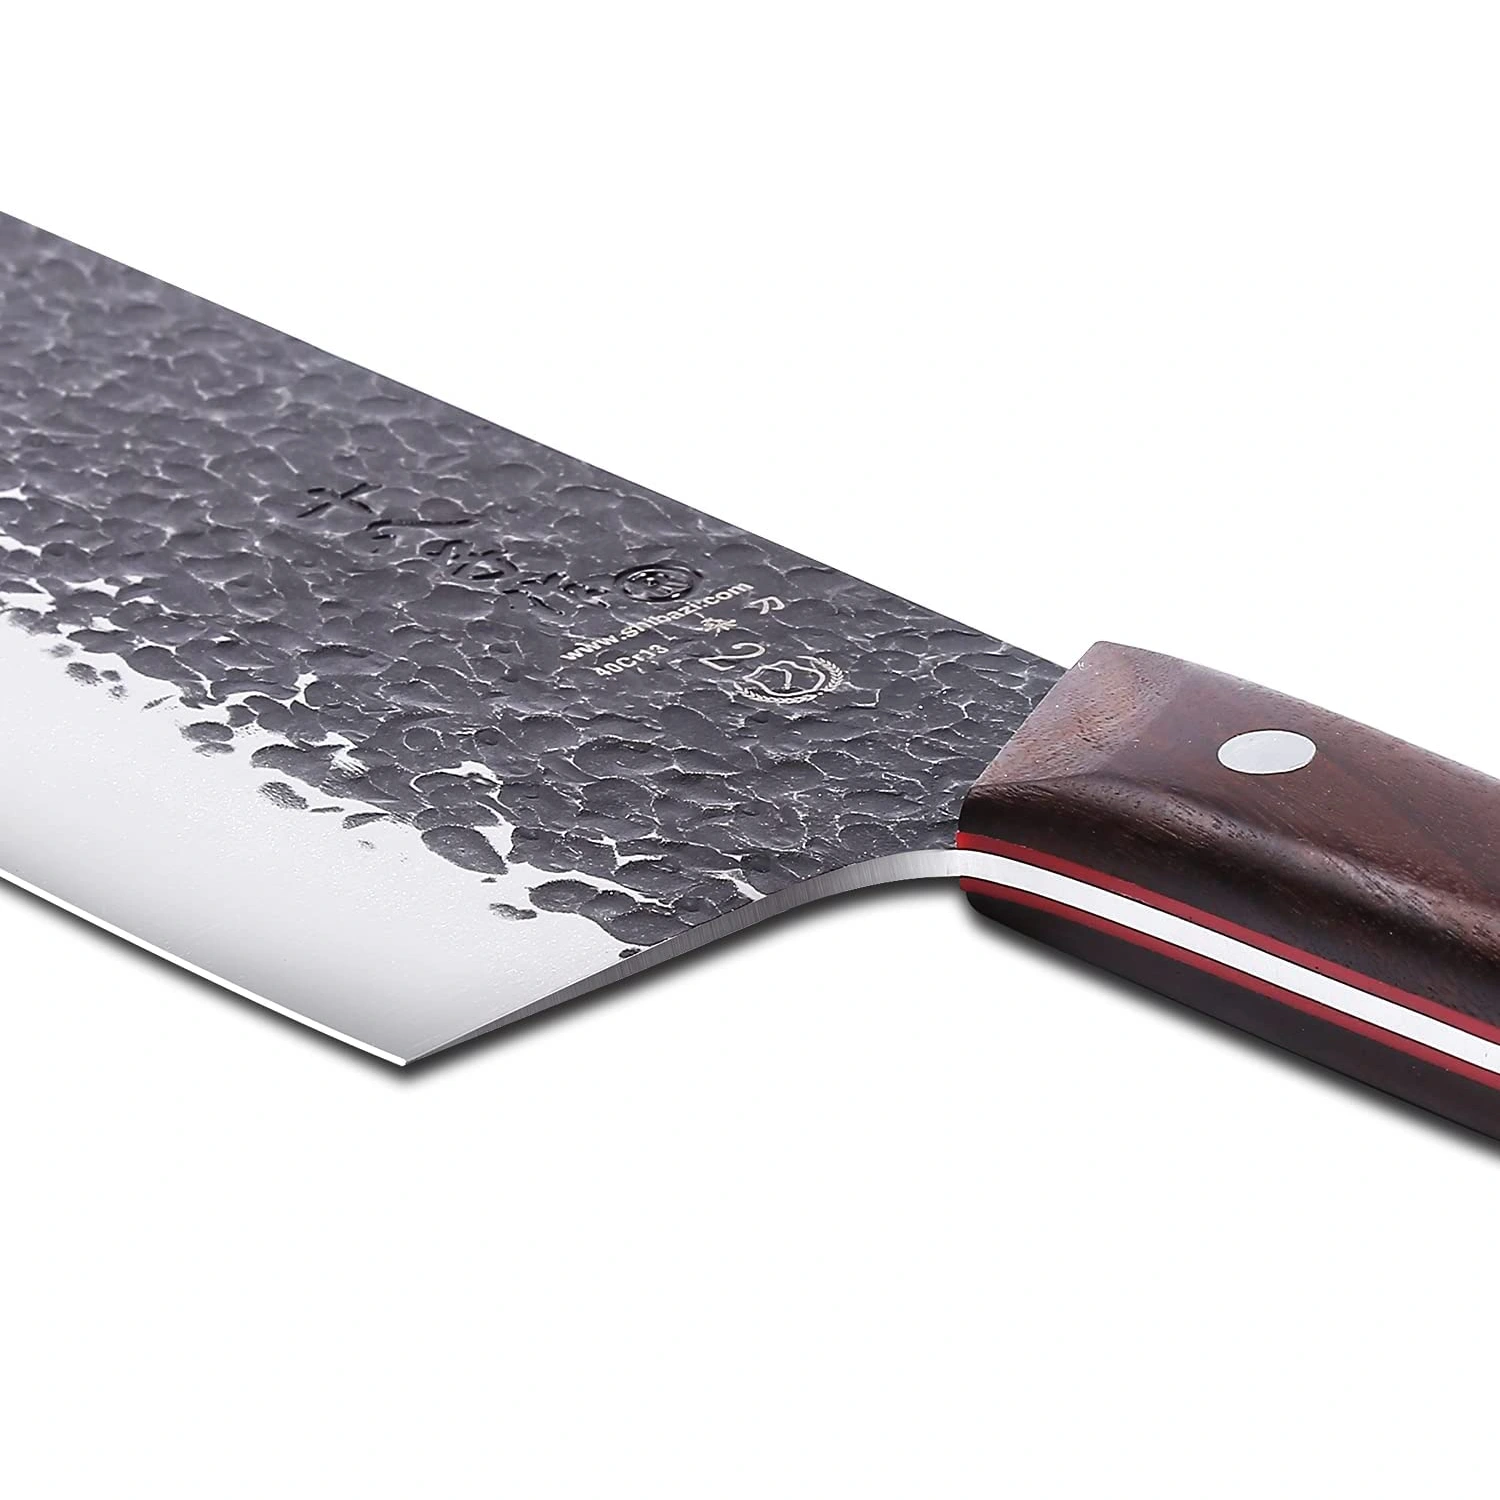 SHI BA ZI ZUO 8 Inch Forged Professional Chef Cleaver Vegetable Knife High  Carbon Steel with Sturdy Rosewood Handle for Daily Basis